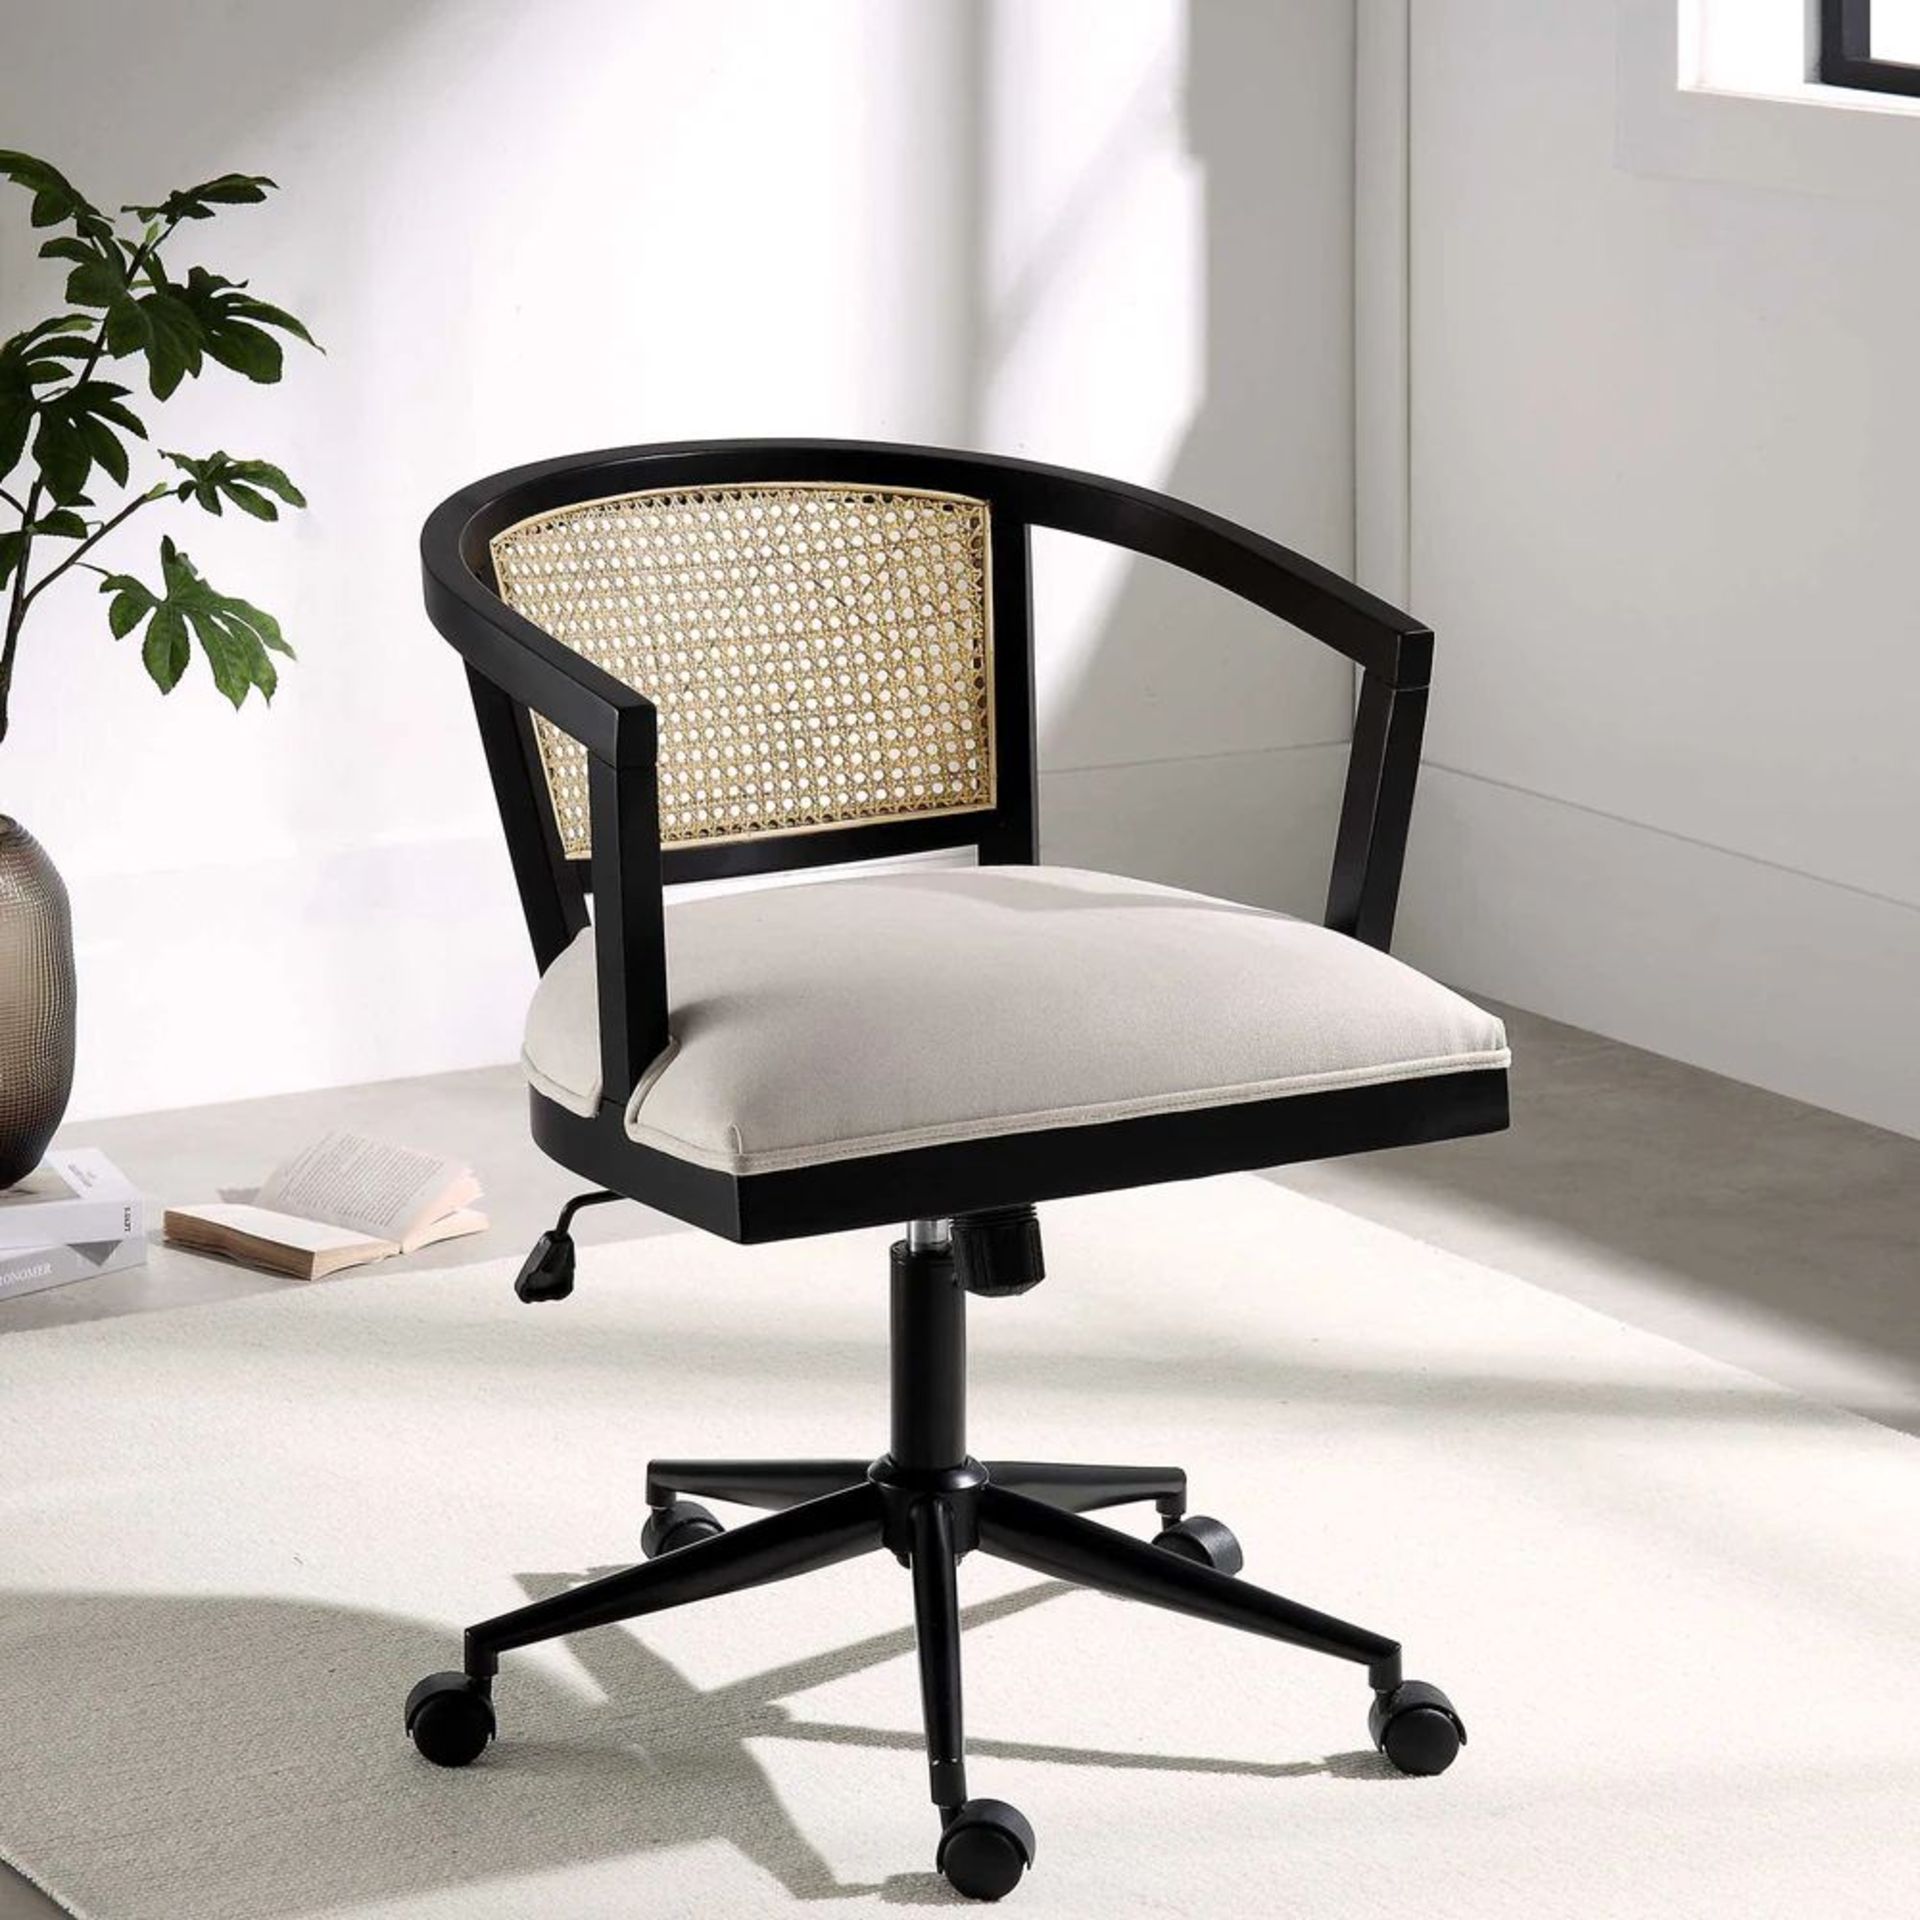 Lucia Natural Cane Swivel Desk Chair. - SR24. The chair features a beautiful clam shell design